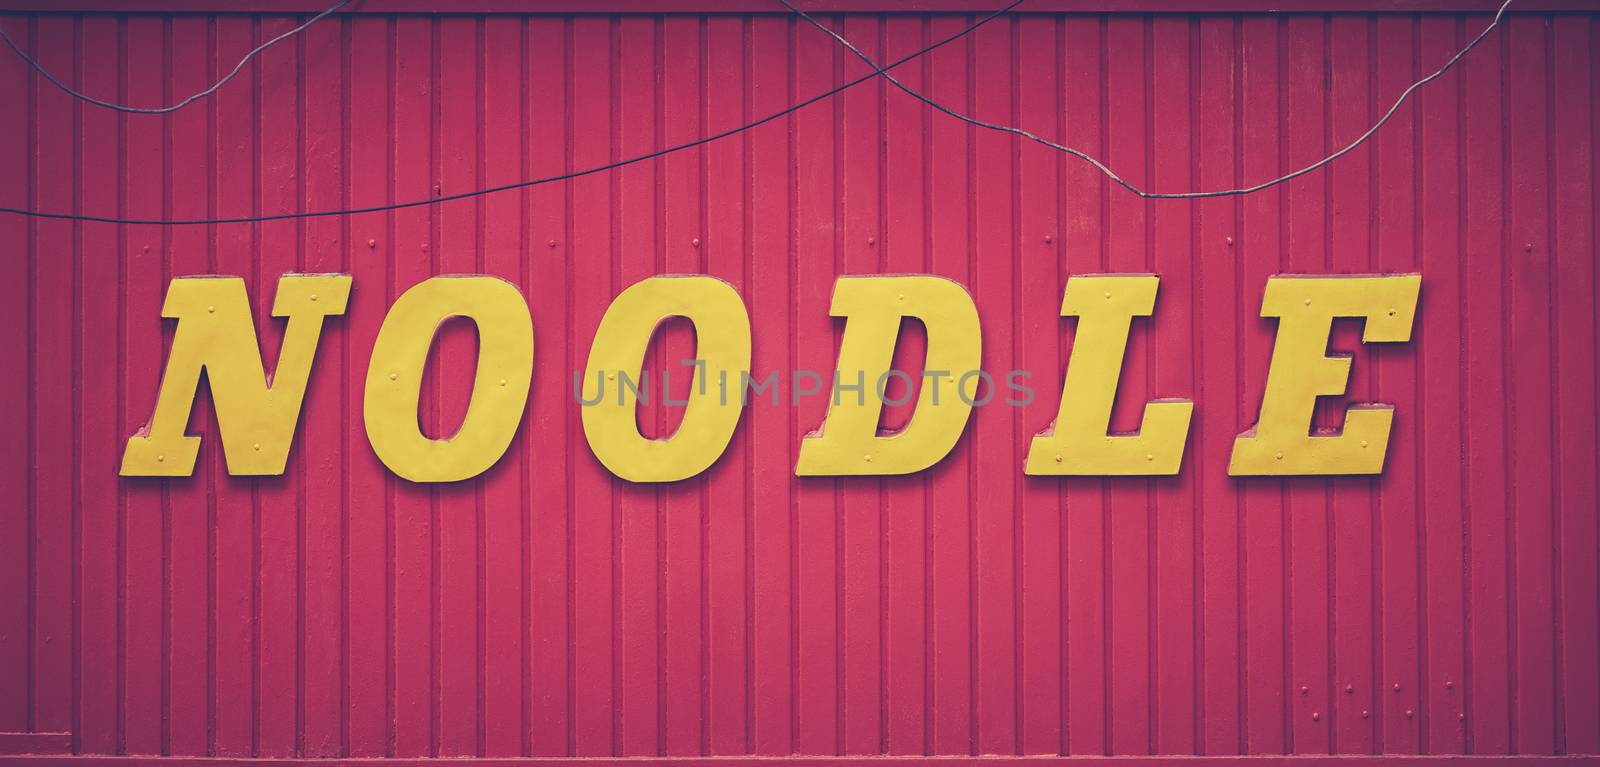 Retro Noodle Bar Sign by mrdoomits